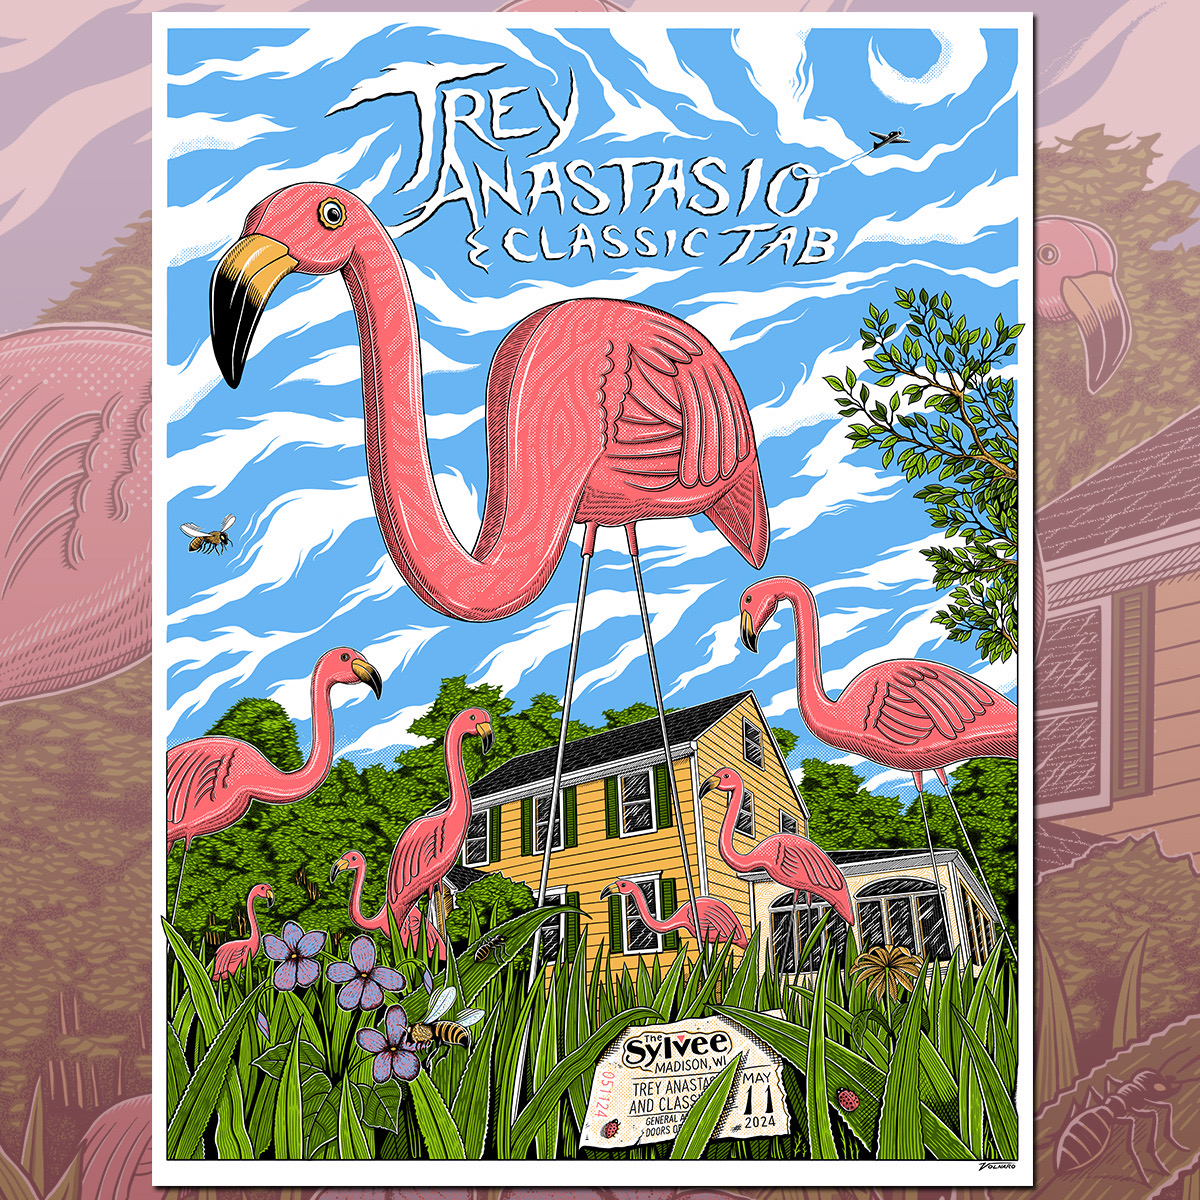 Trey Anastasio and Classic TAB plays tonight in Madison, WI. The show poster is by Volnaro. There will also be a limited foil edition available.